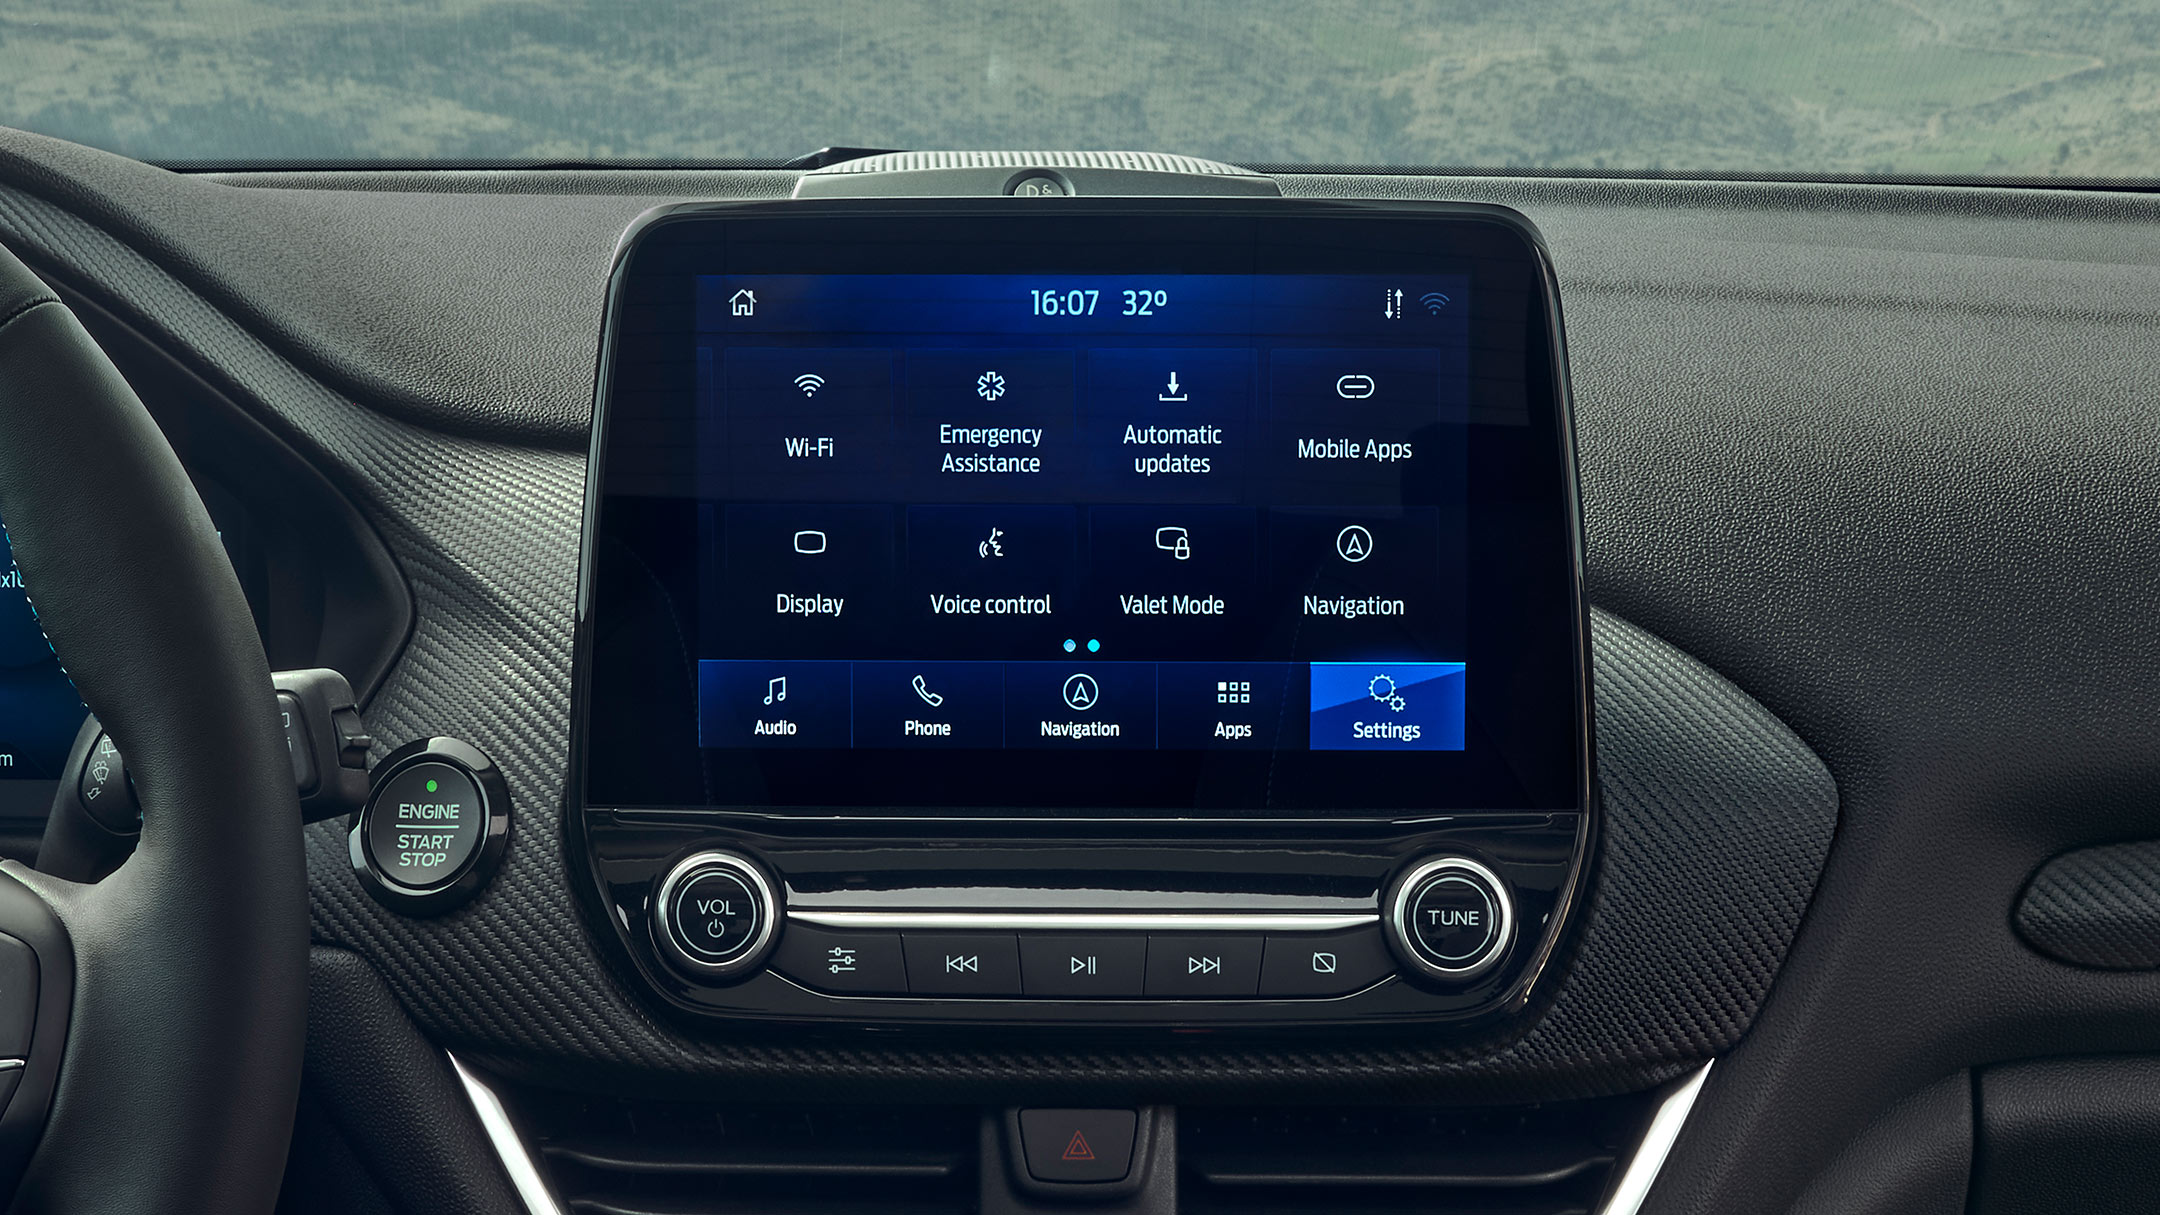 Ford Fiesta interior SYNC 3.2 touchscreen close up